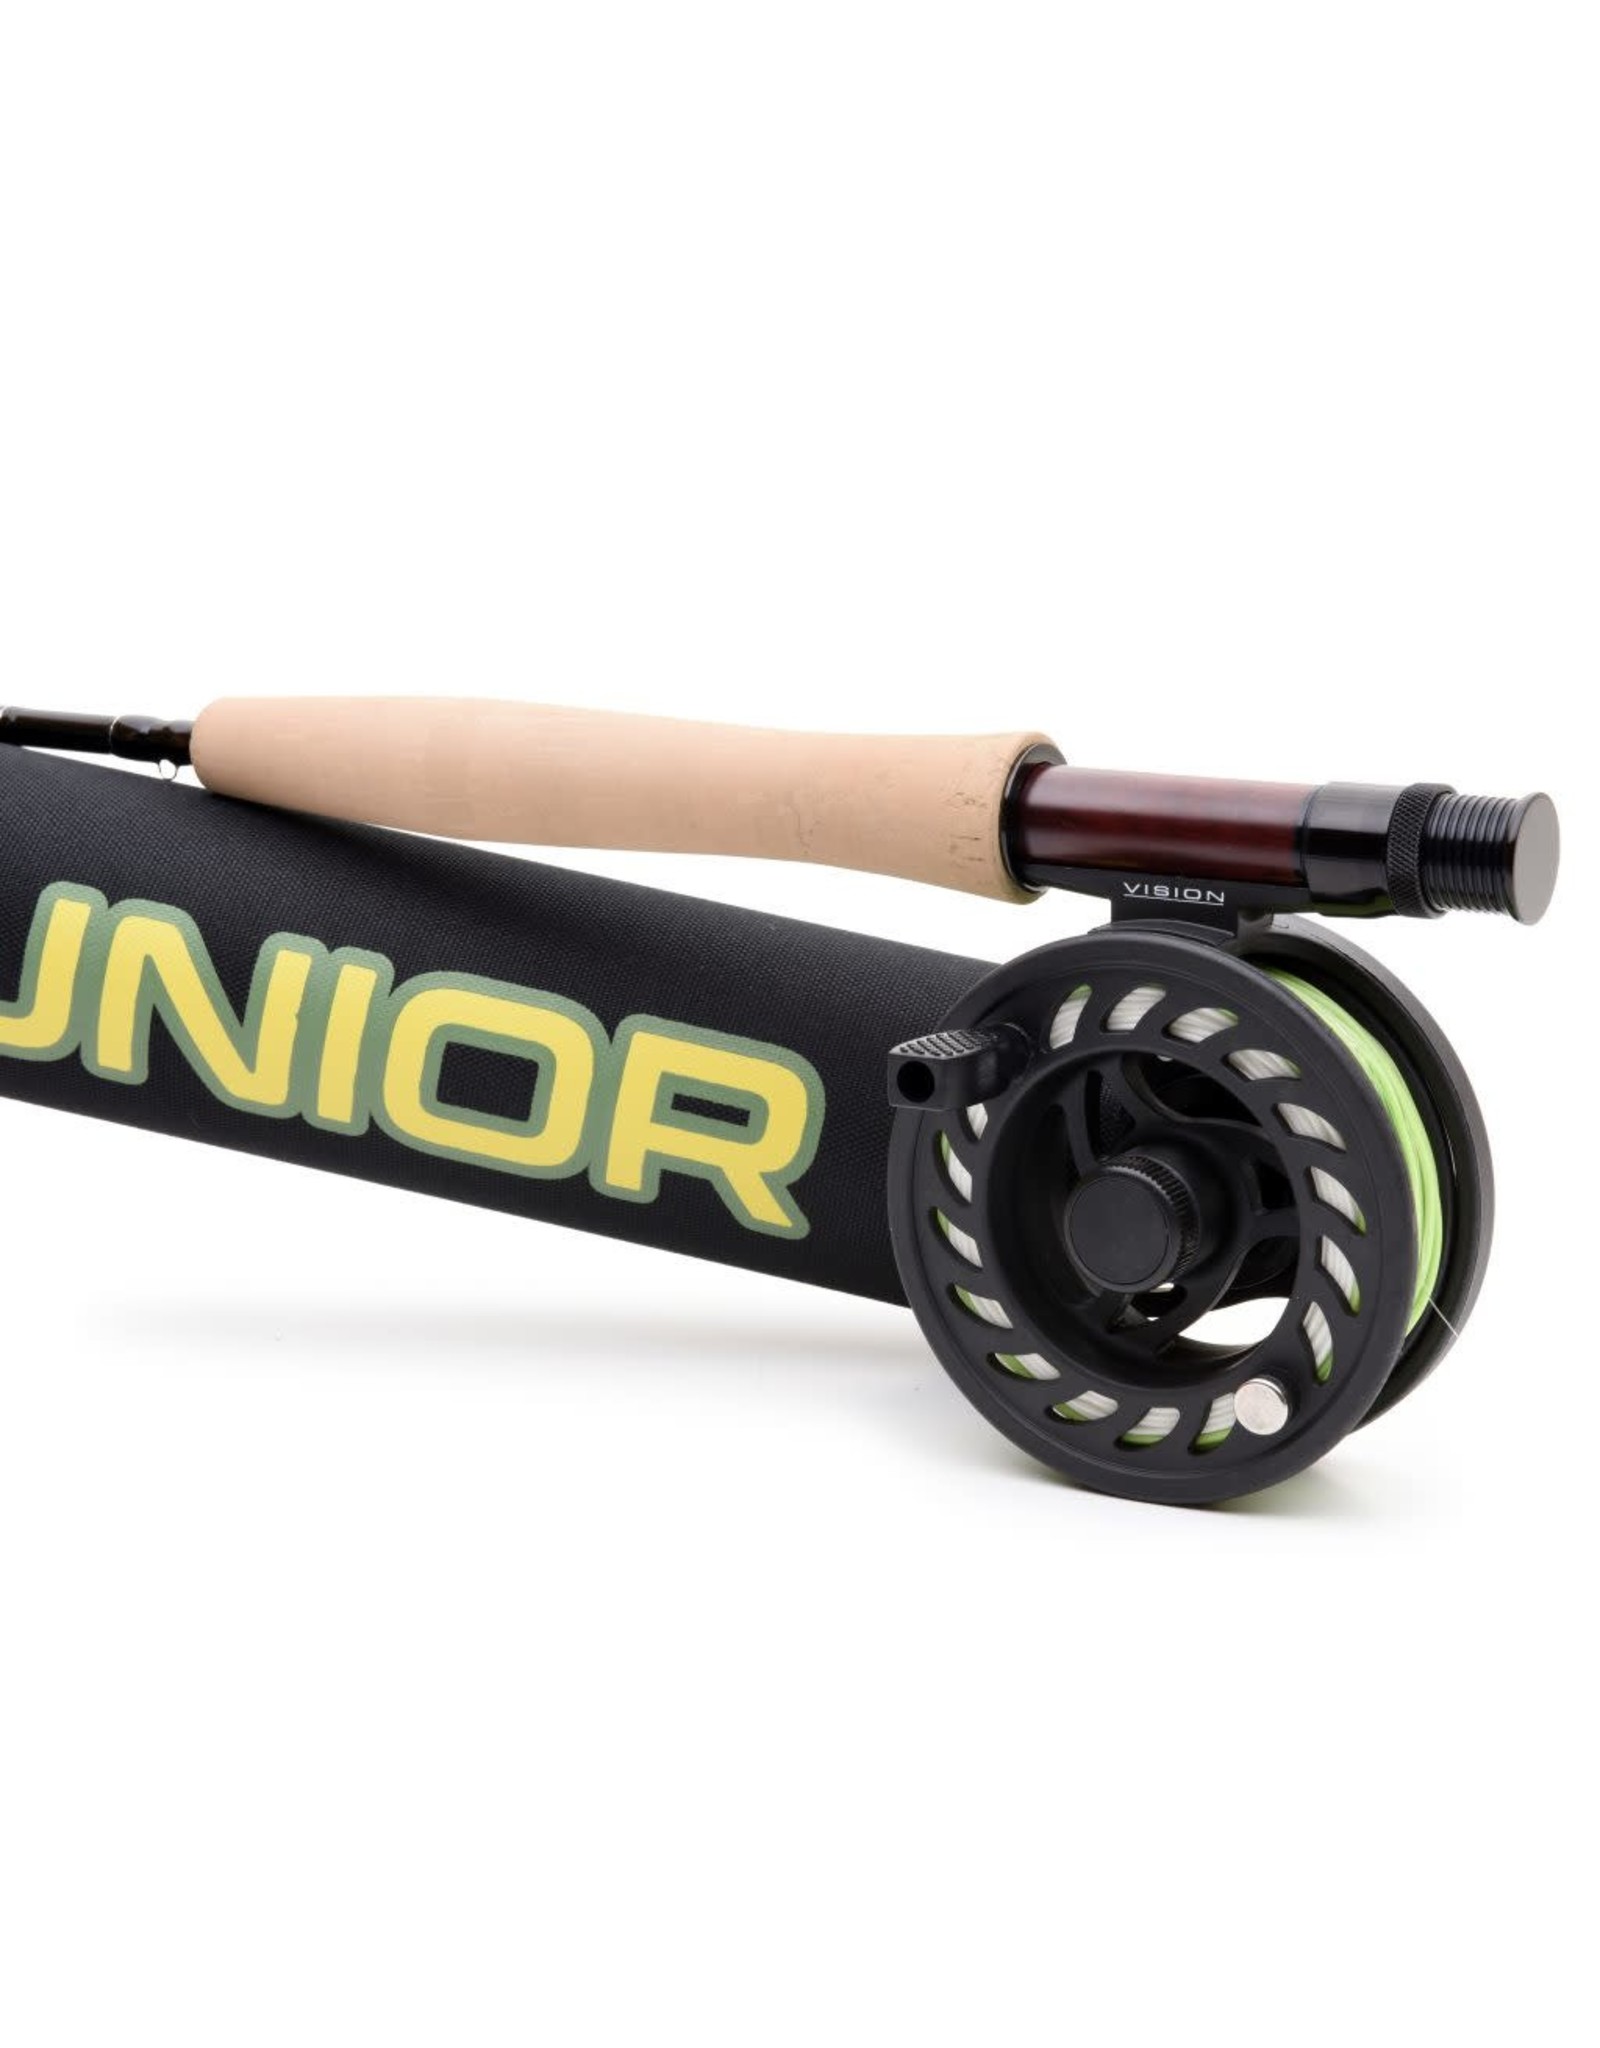 VISION FLY FISHING JUNIOR OUTFIT 7'6" 5wt